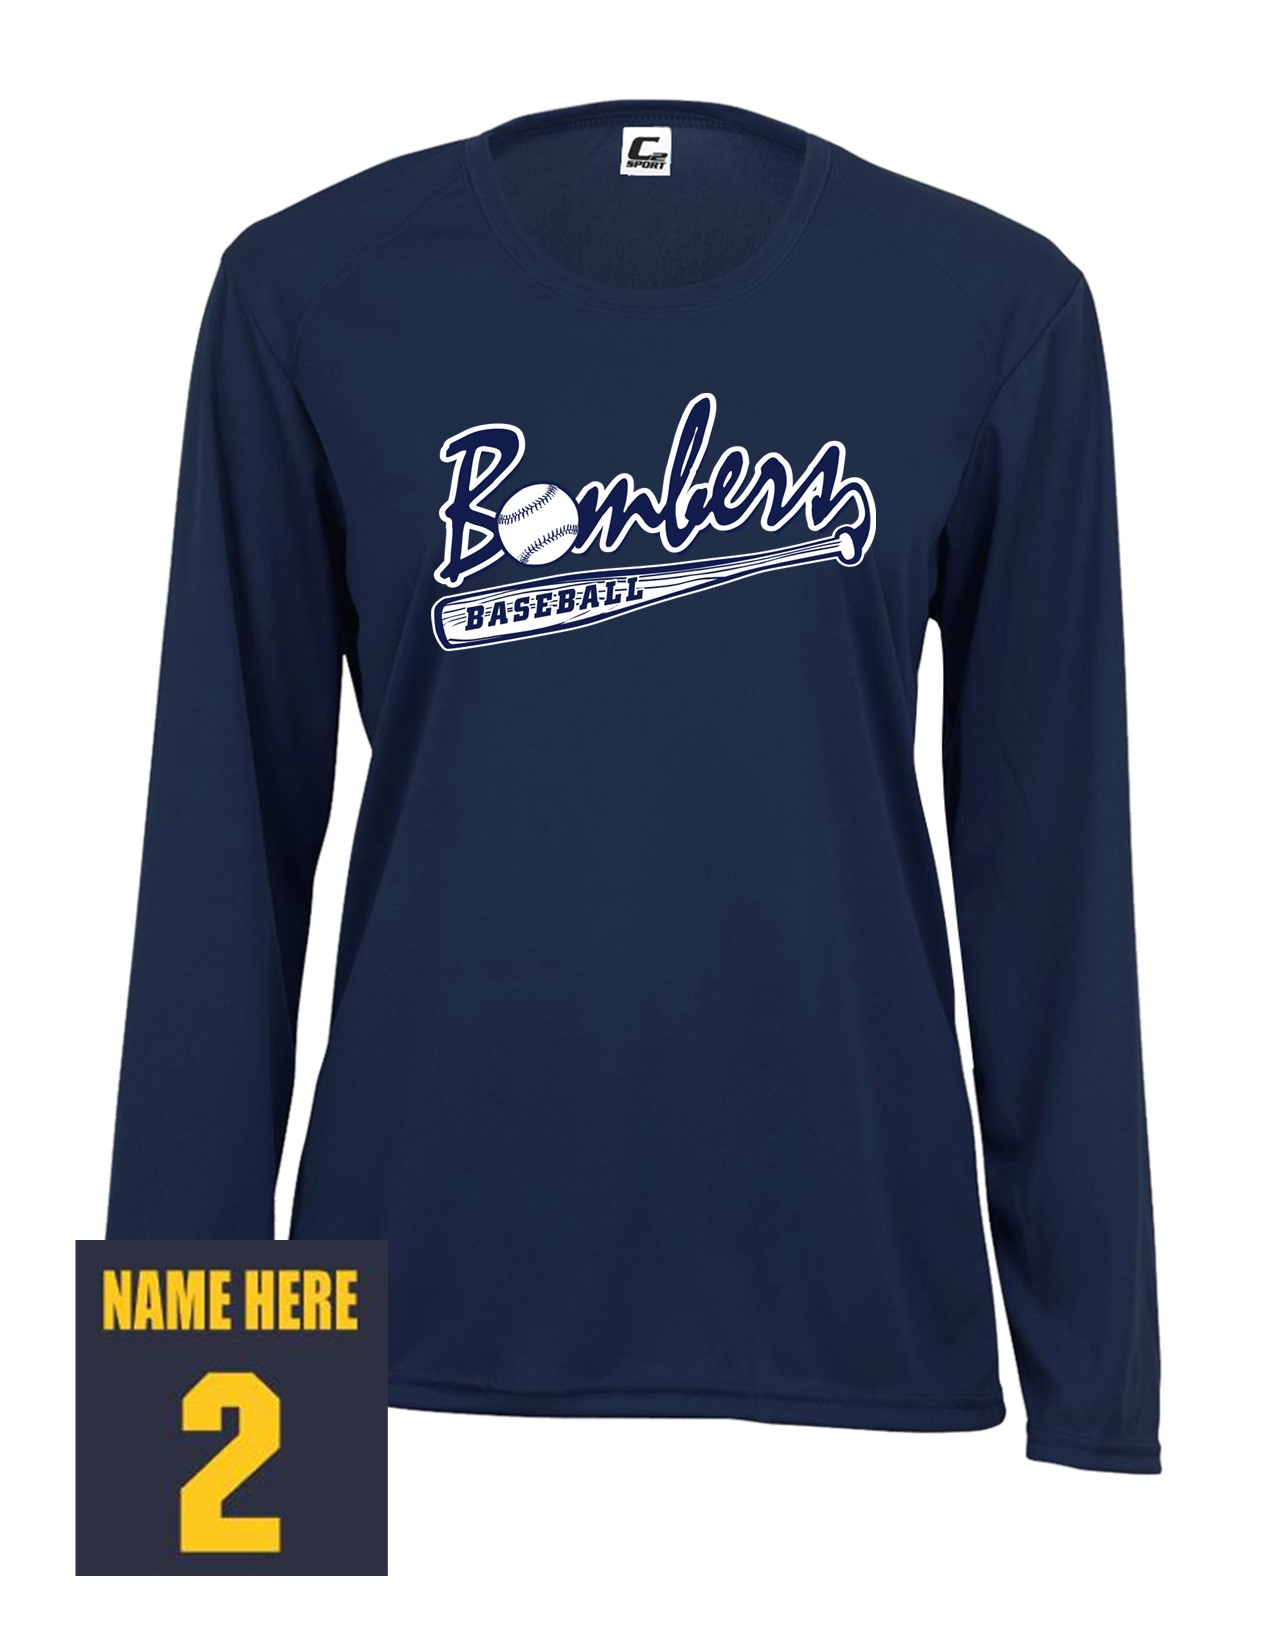 58c Badger 5604 Ladies C2 Performance 100% Poly Wicking Long Sleeve T-Shirt with Logo 3 Front Print